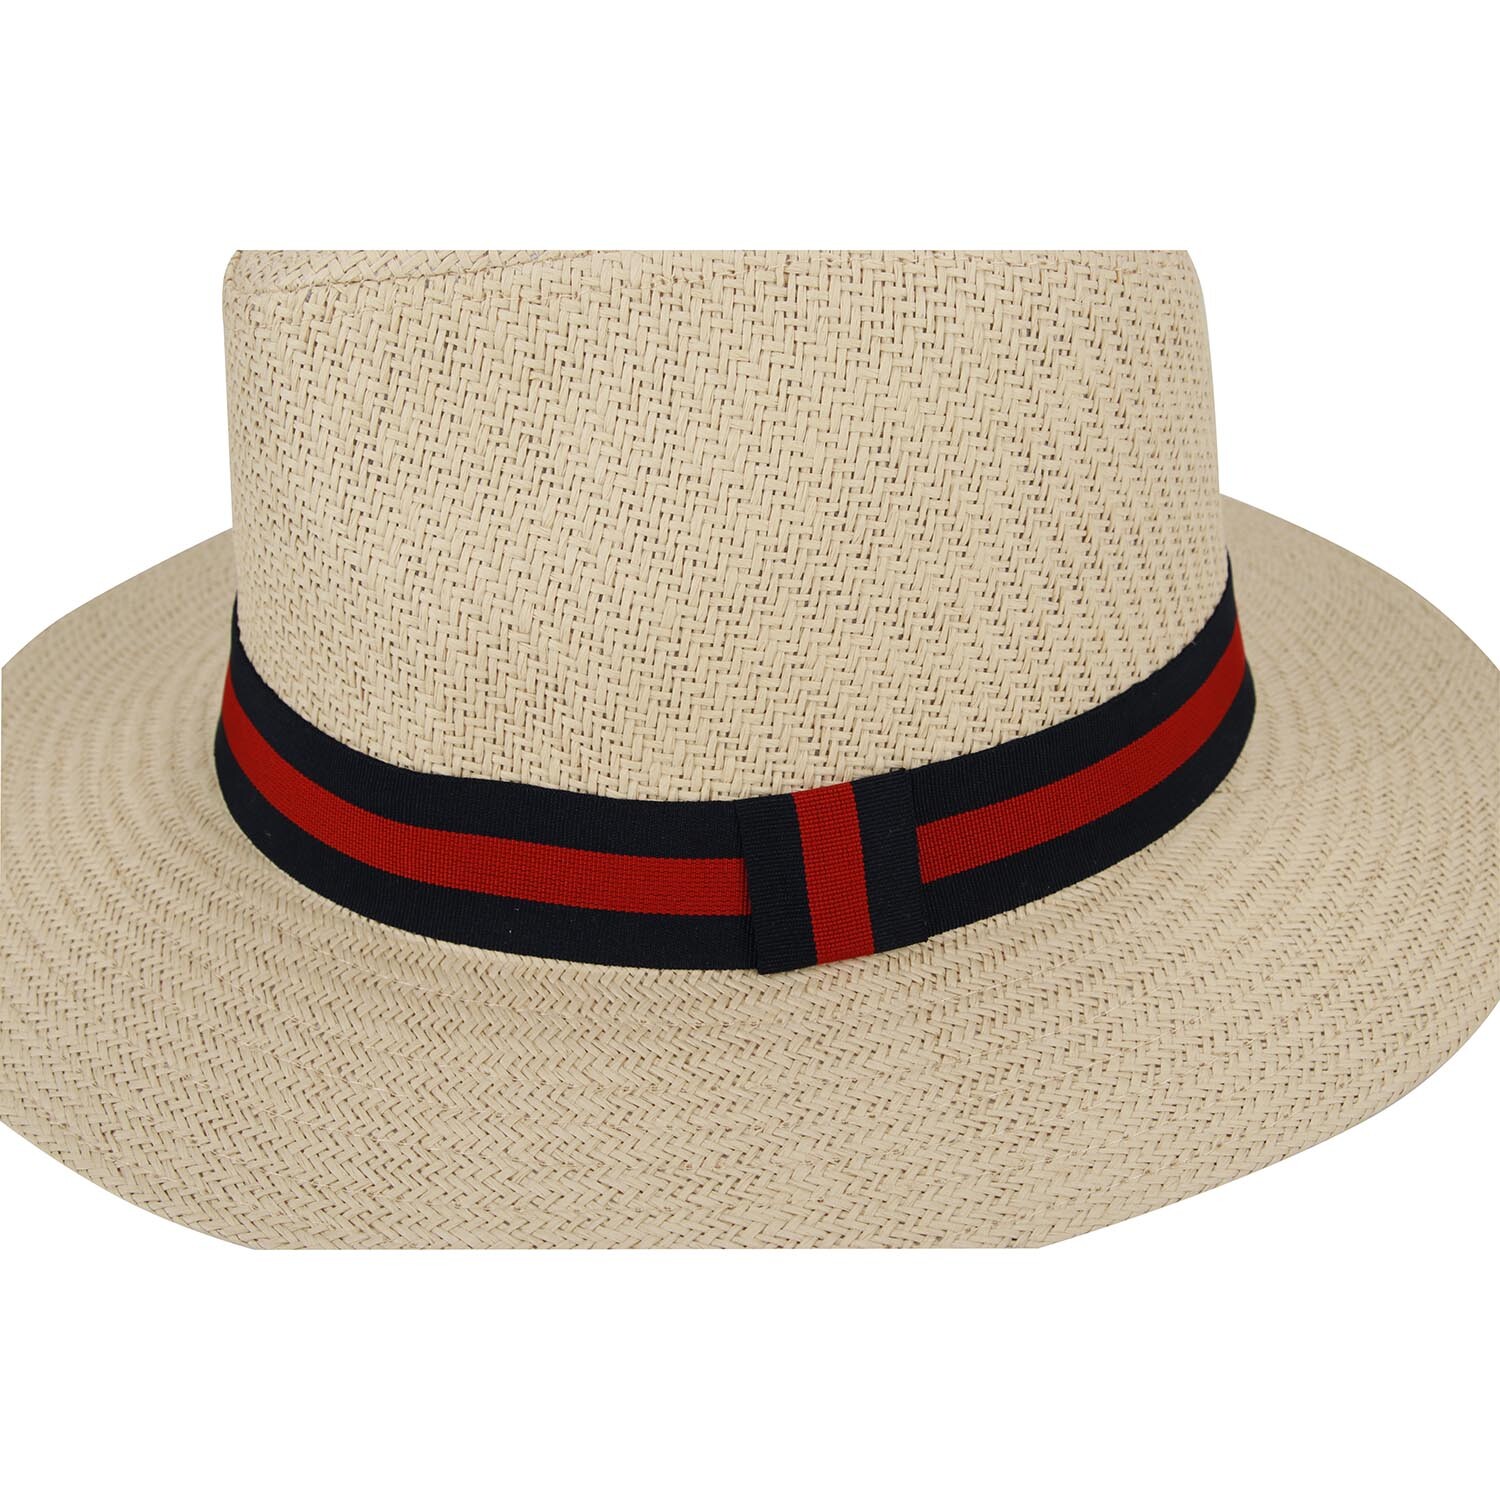 Red Band Straw Hat - Natural Image 2